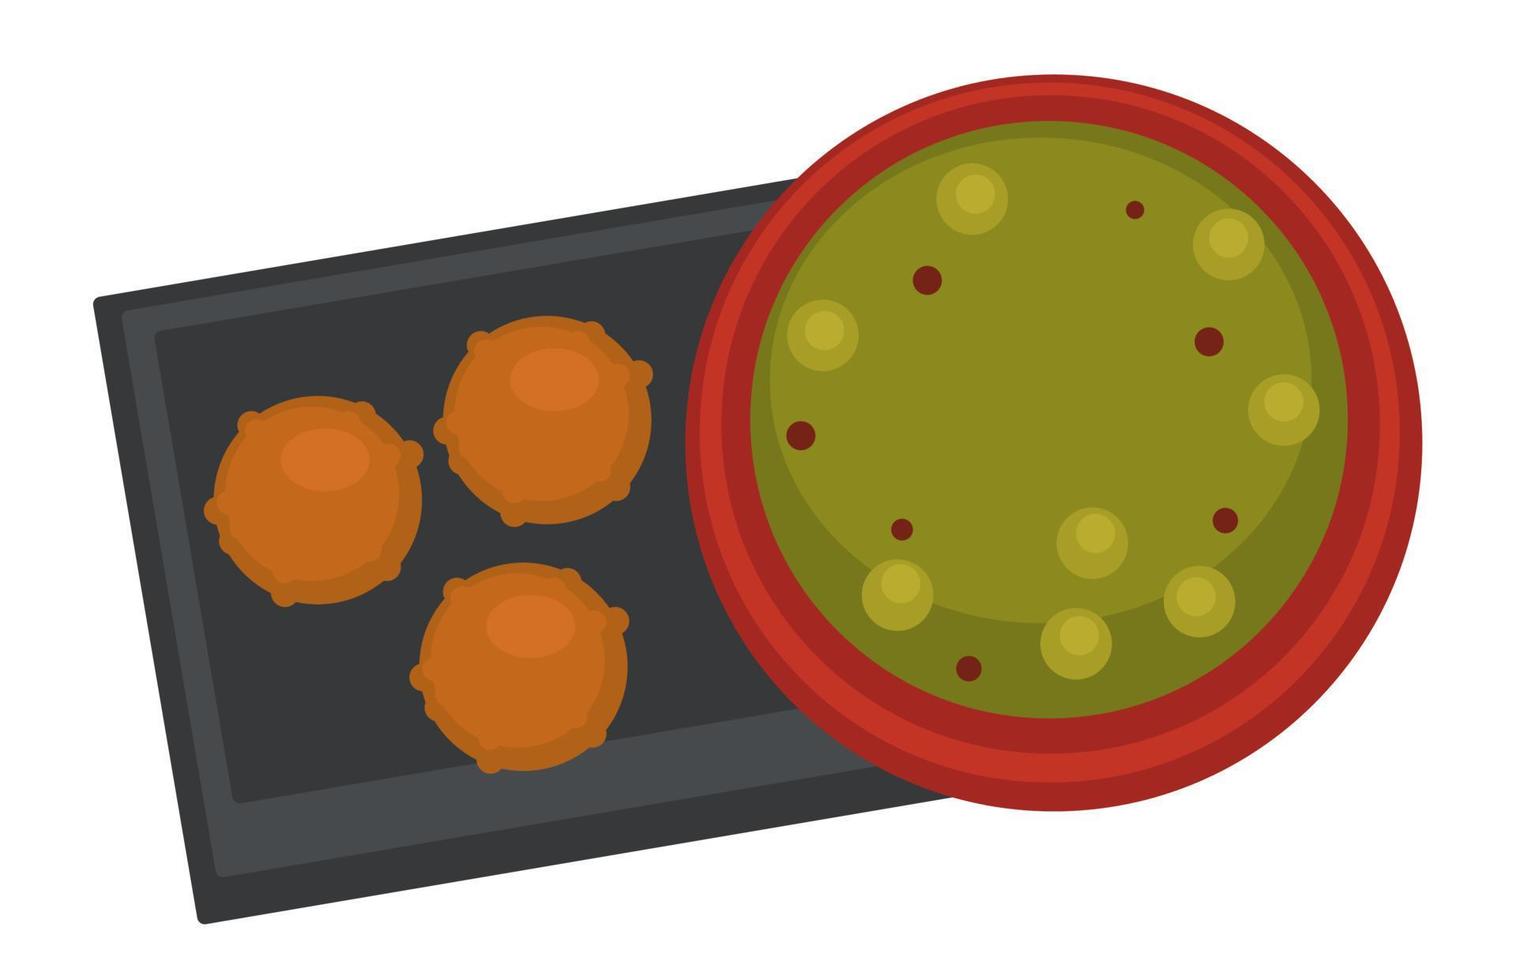 Meatballs served by bowl of pea soup restaurant vector